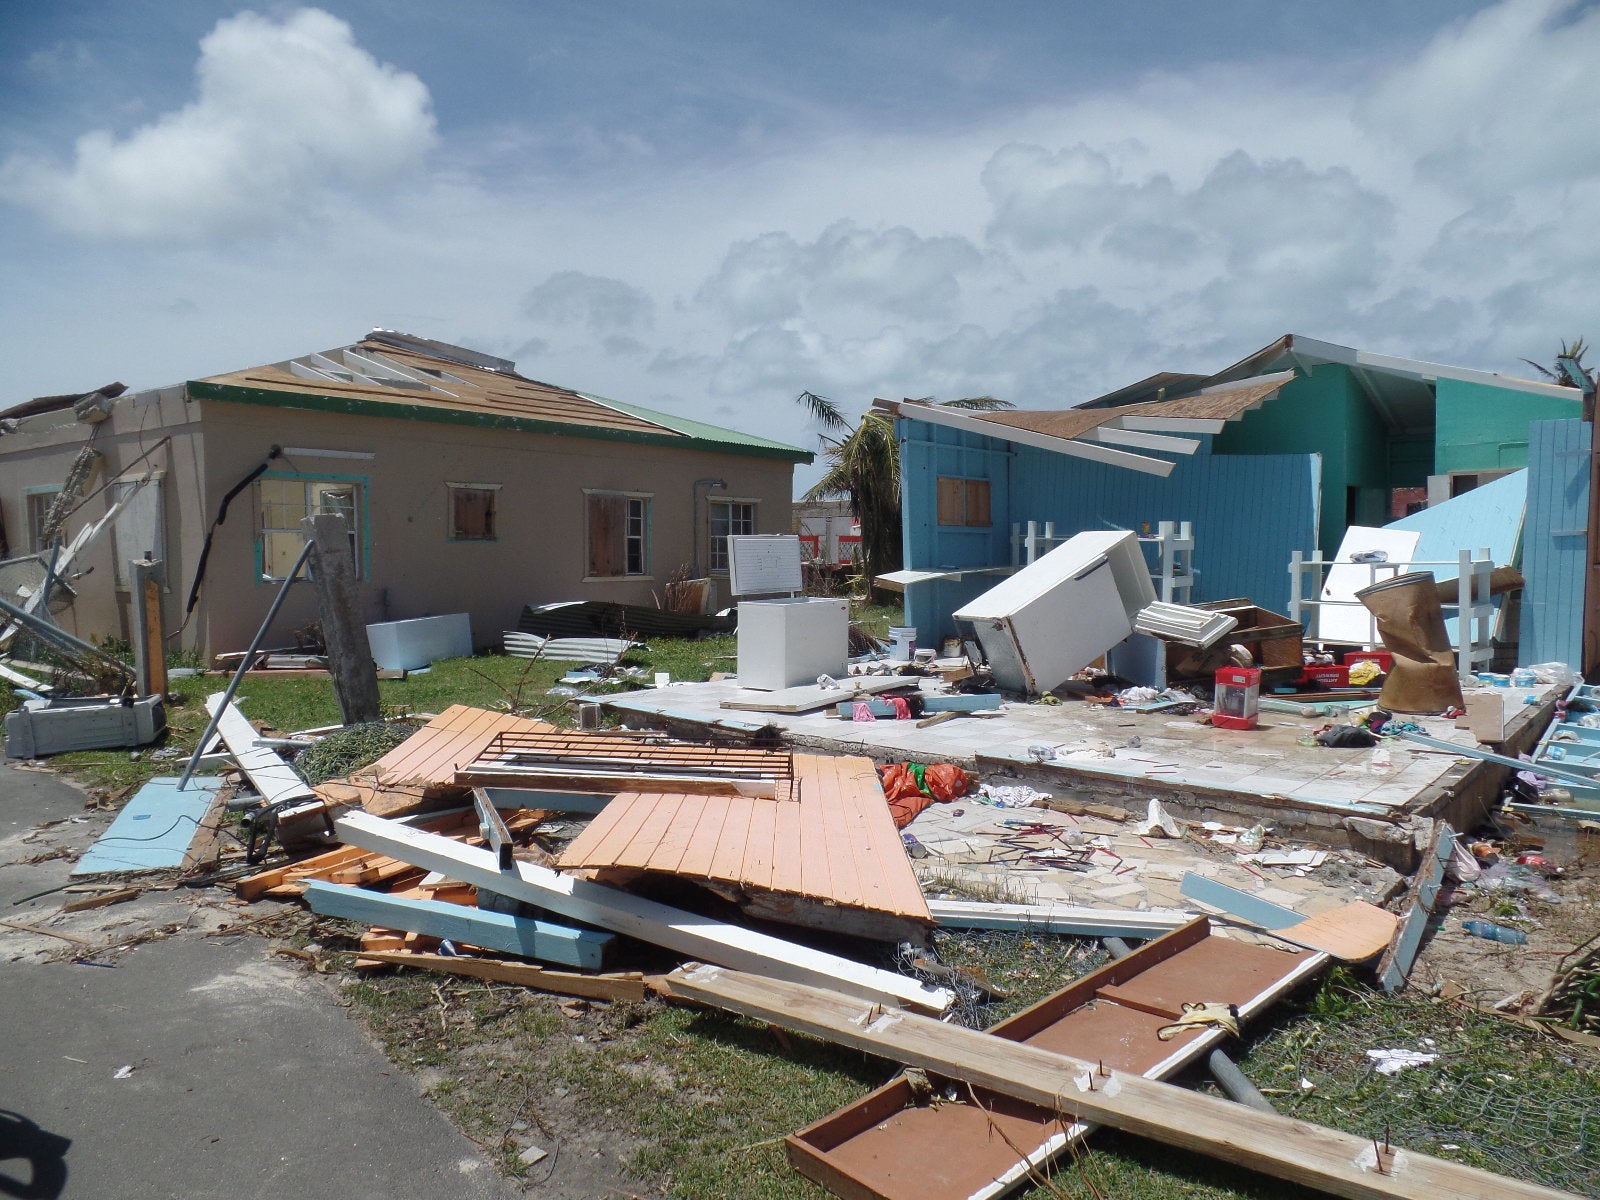 Around 90 per cent of buildings on the island have been destroyed